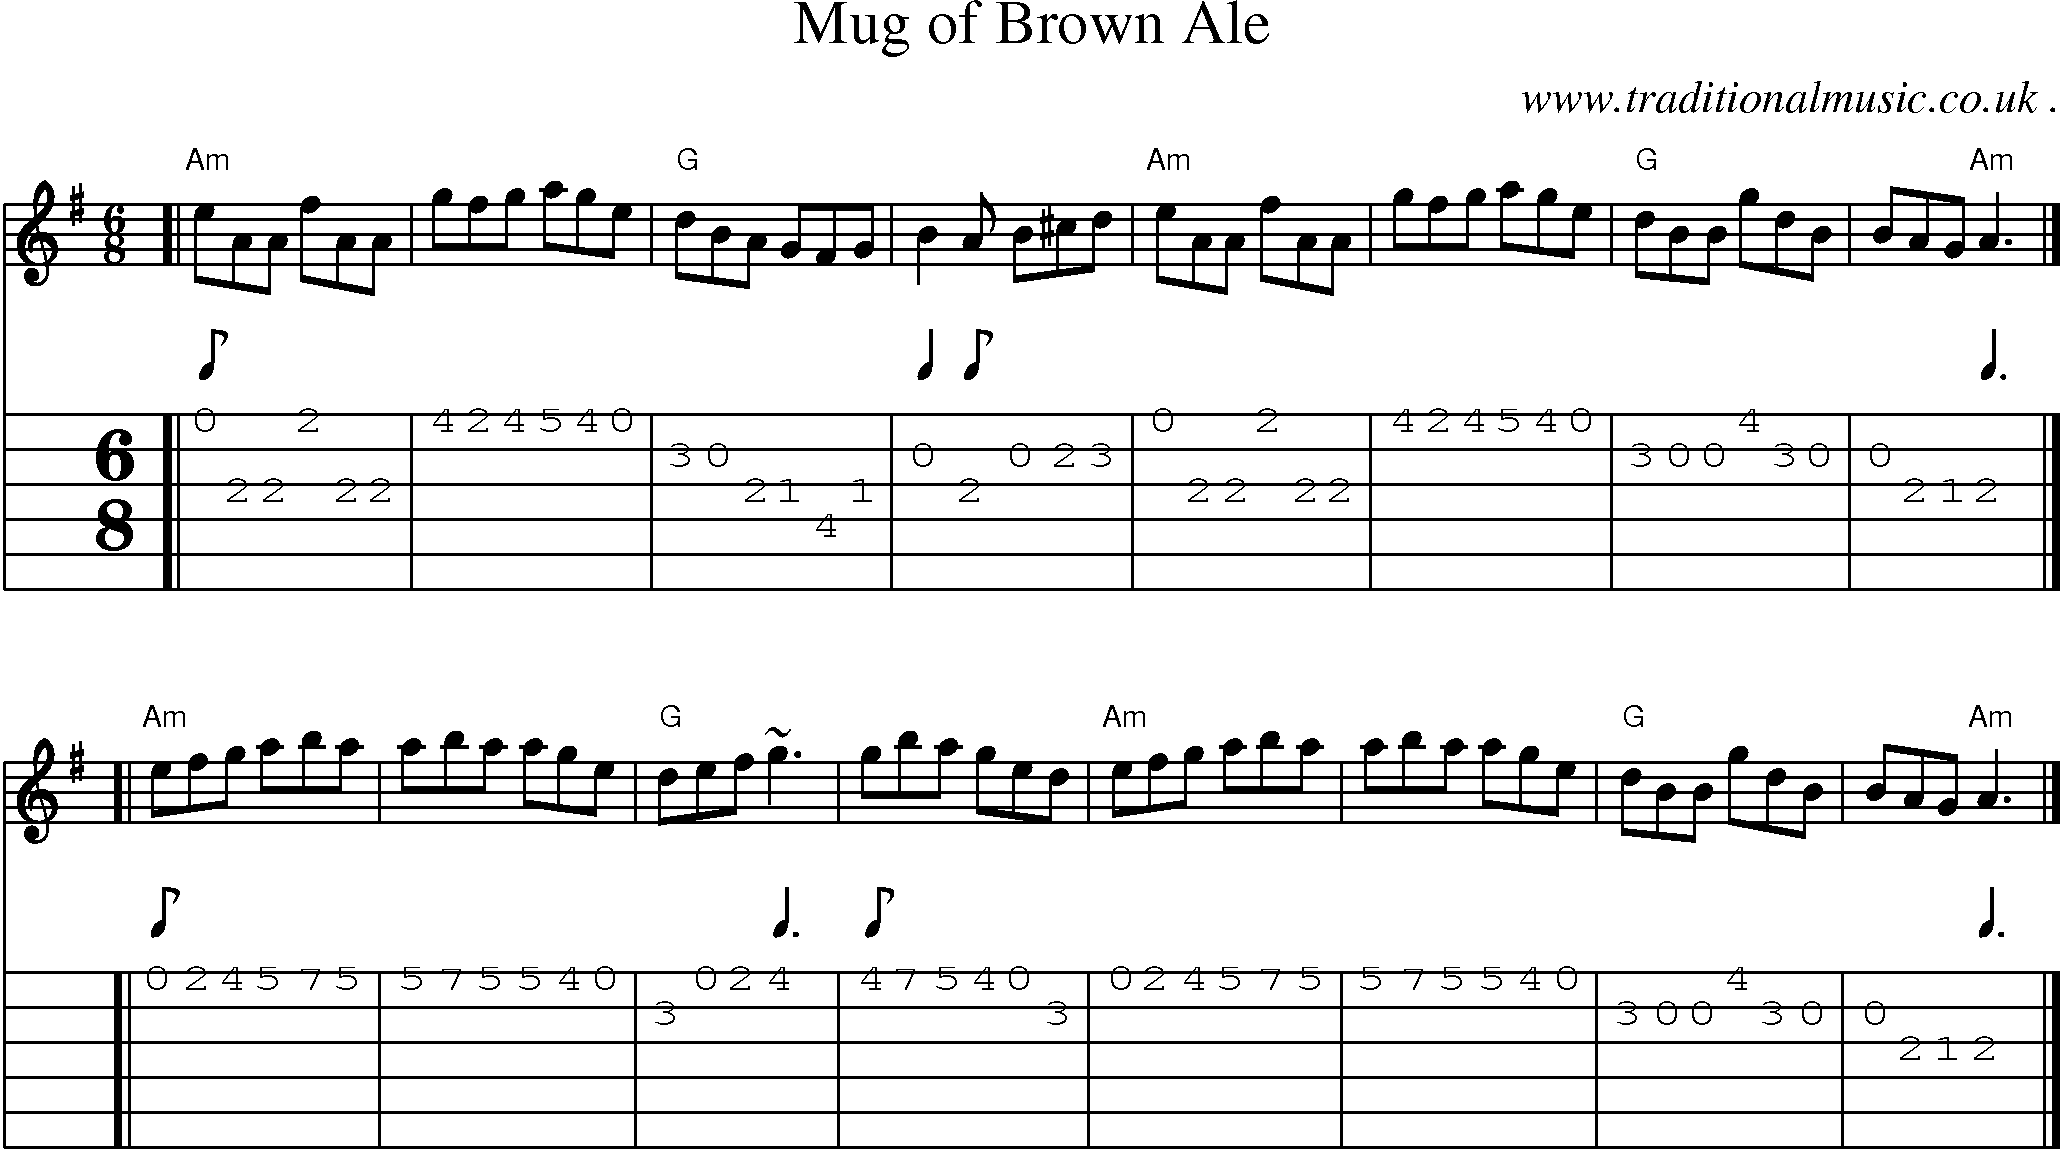 Sheet-music  score, Chords and Guitar Tabs for Mug Of Brown Ale